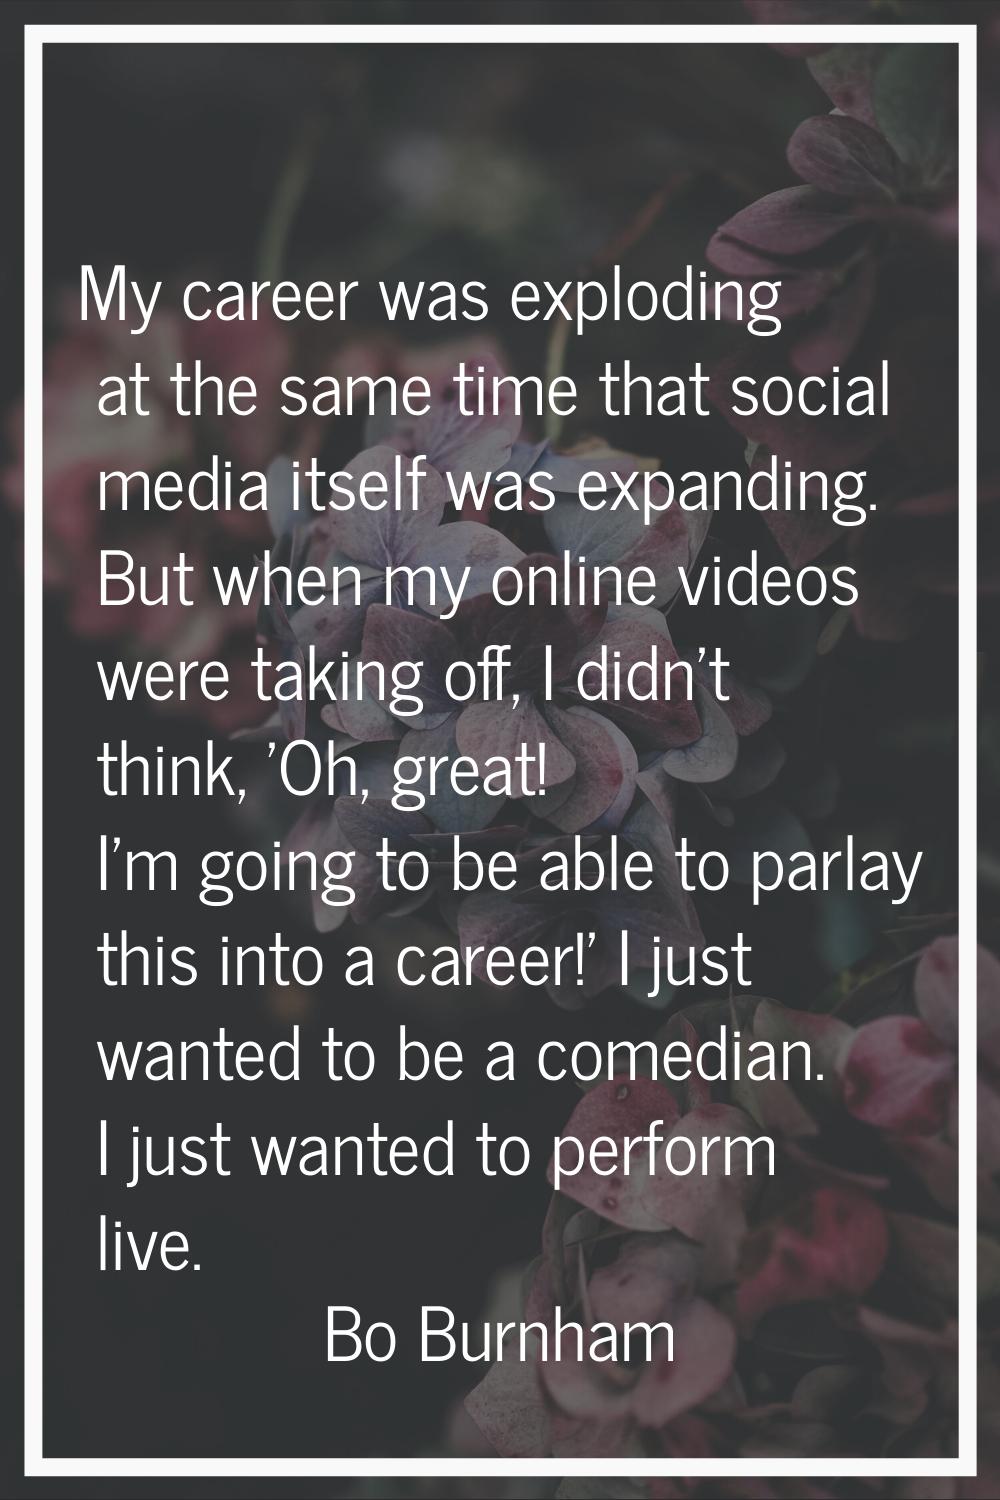 My career was exploding at the same time that social media itself was expanding. But when my online